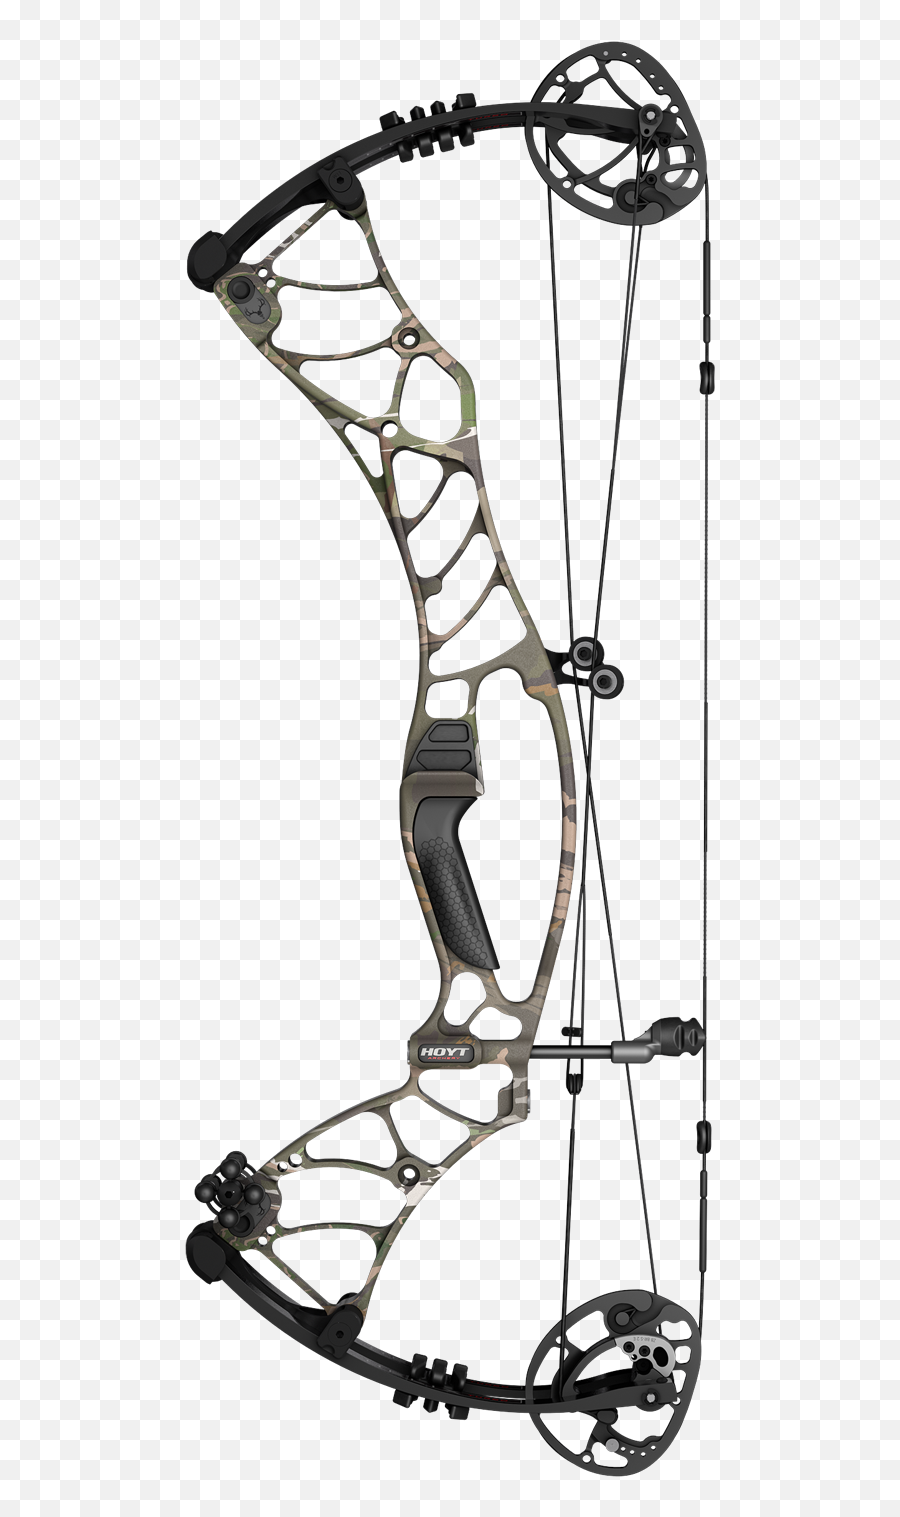 Bows - Hoyt Helix Pro Compound Bows Png,Mathews Icon Bow Price